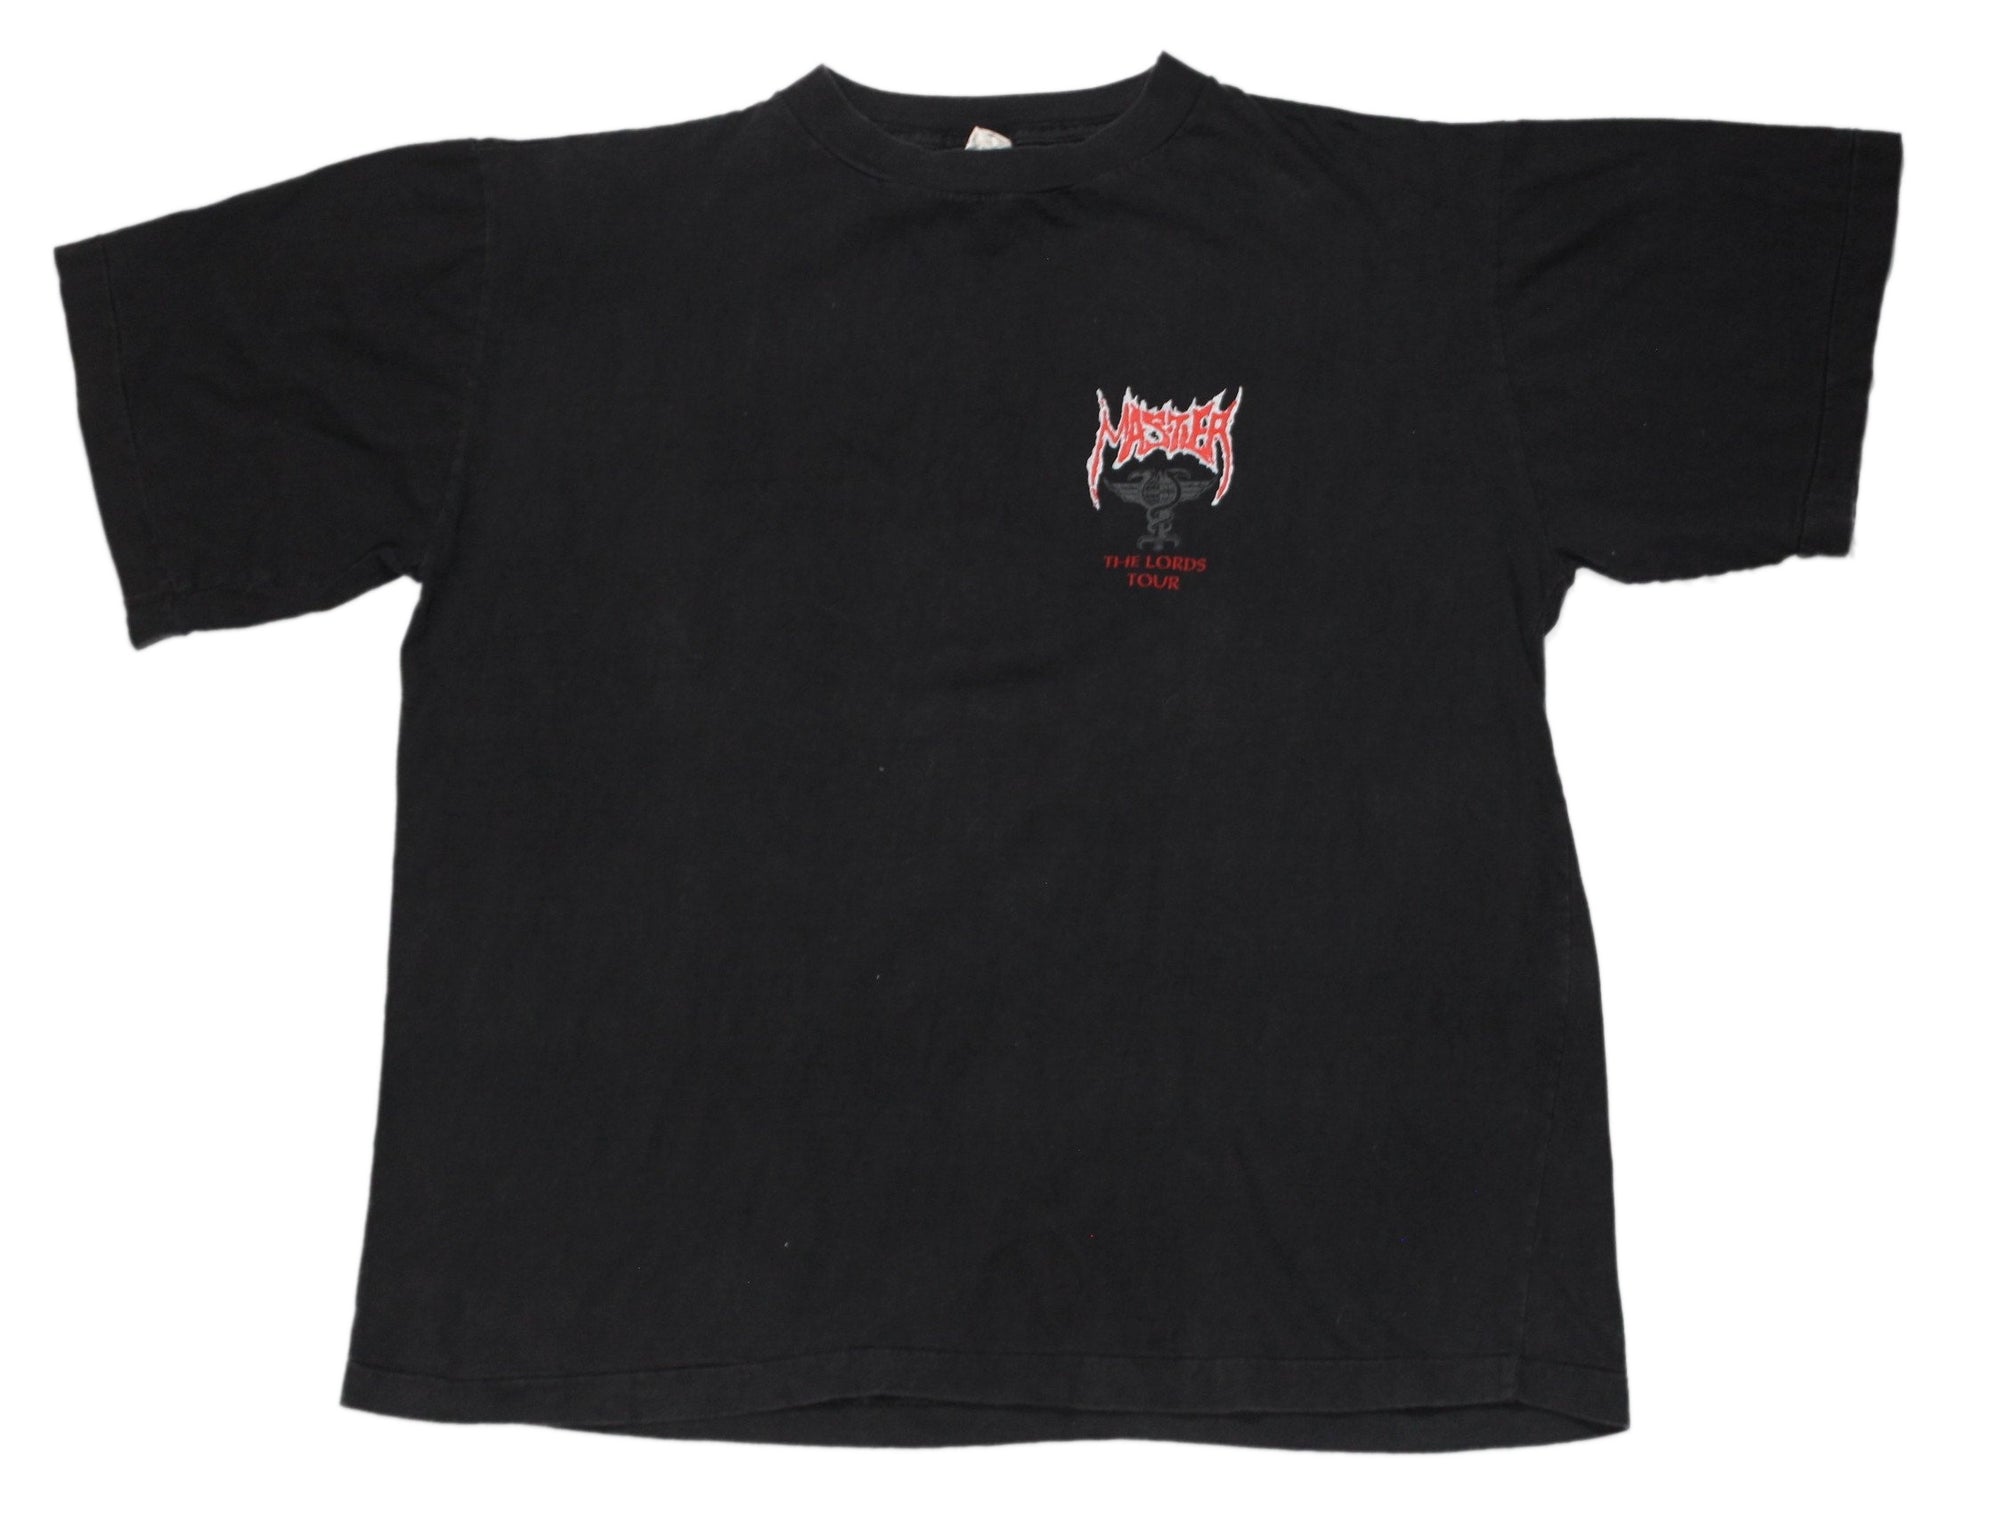 Vintage Master "The Lords Tour" T-Shirt - jointcustodydc